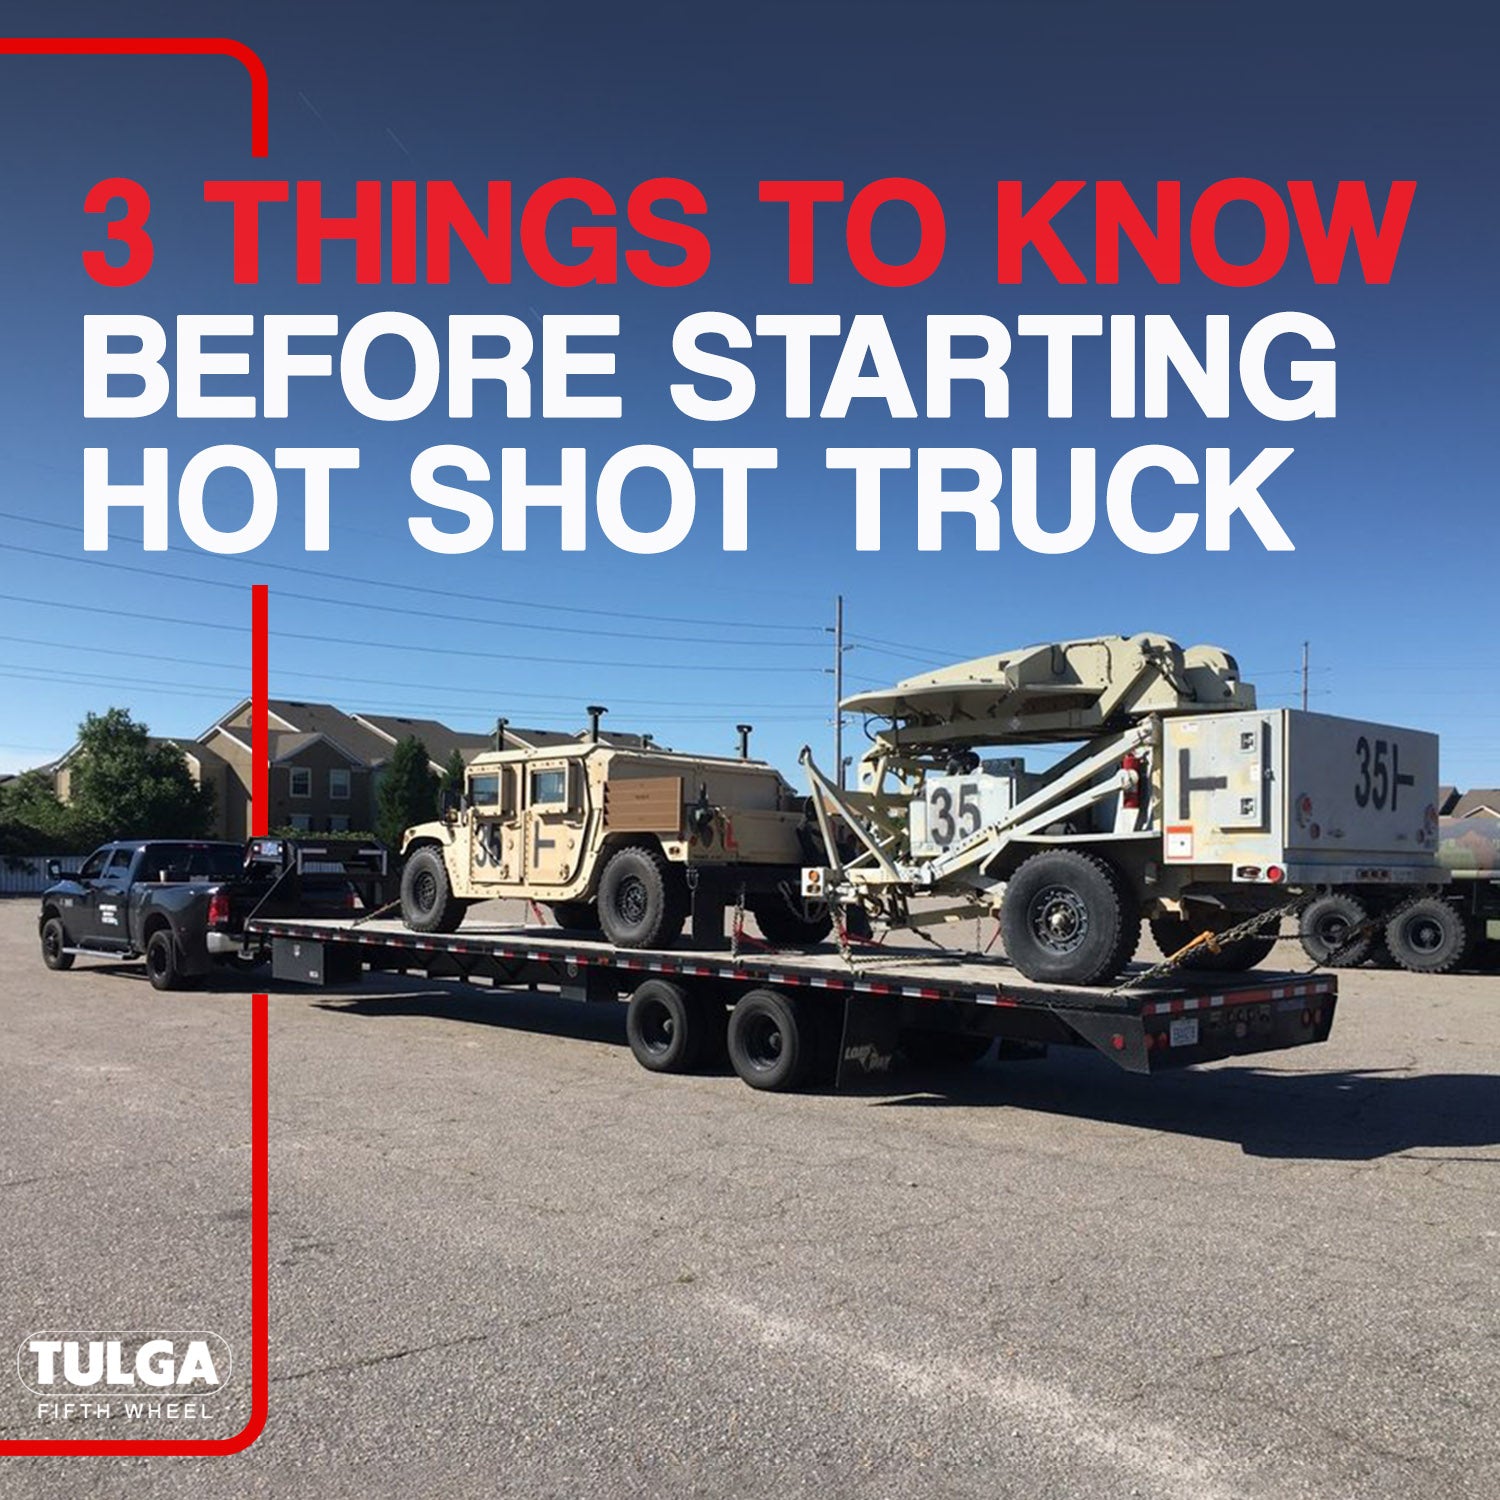 3 Things to Know Before Starting Hot Shot Truck